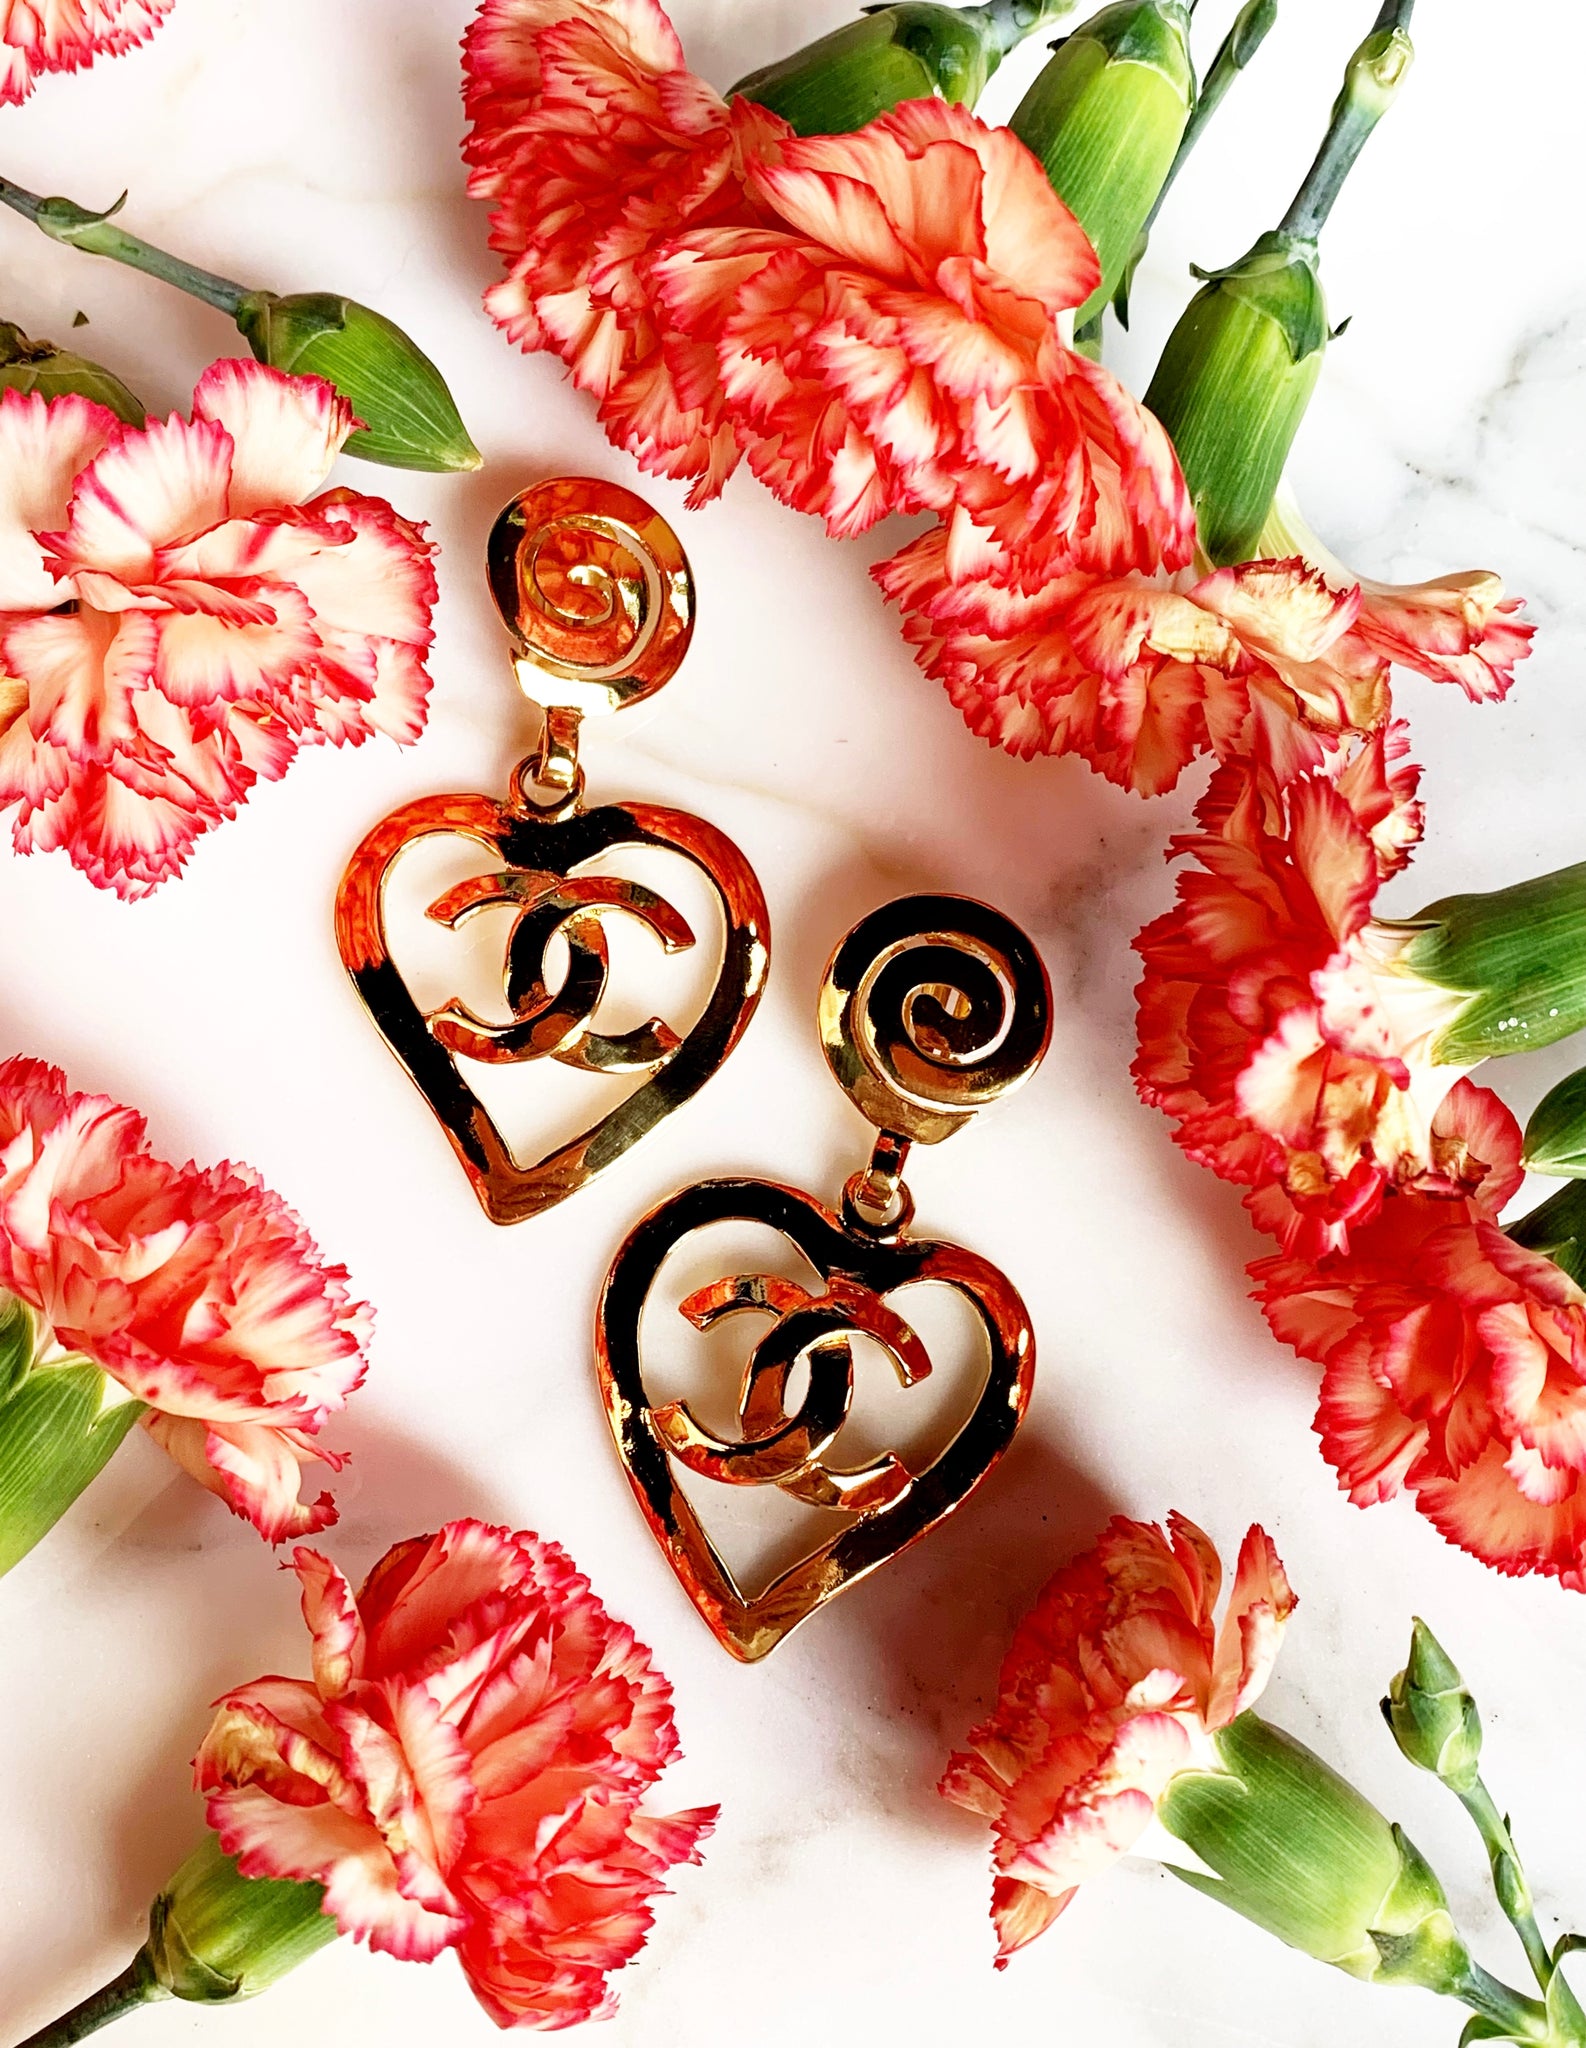 CHANEL BARBIE COLLECTION HEART EARRINGS 1995 – The Paris Mademoiselle